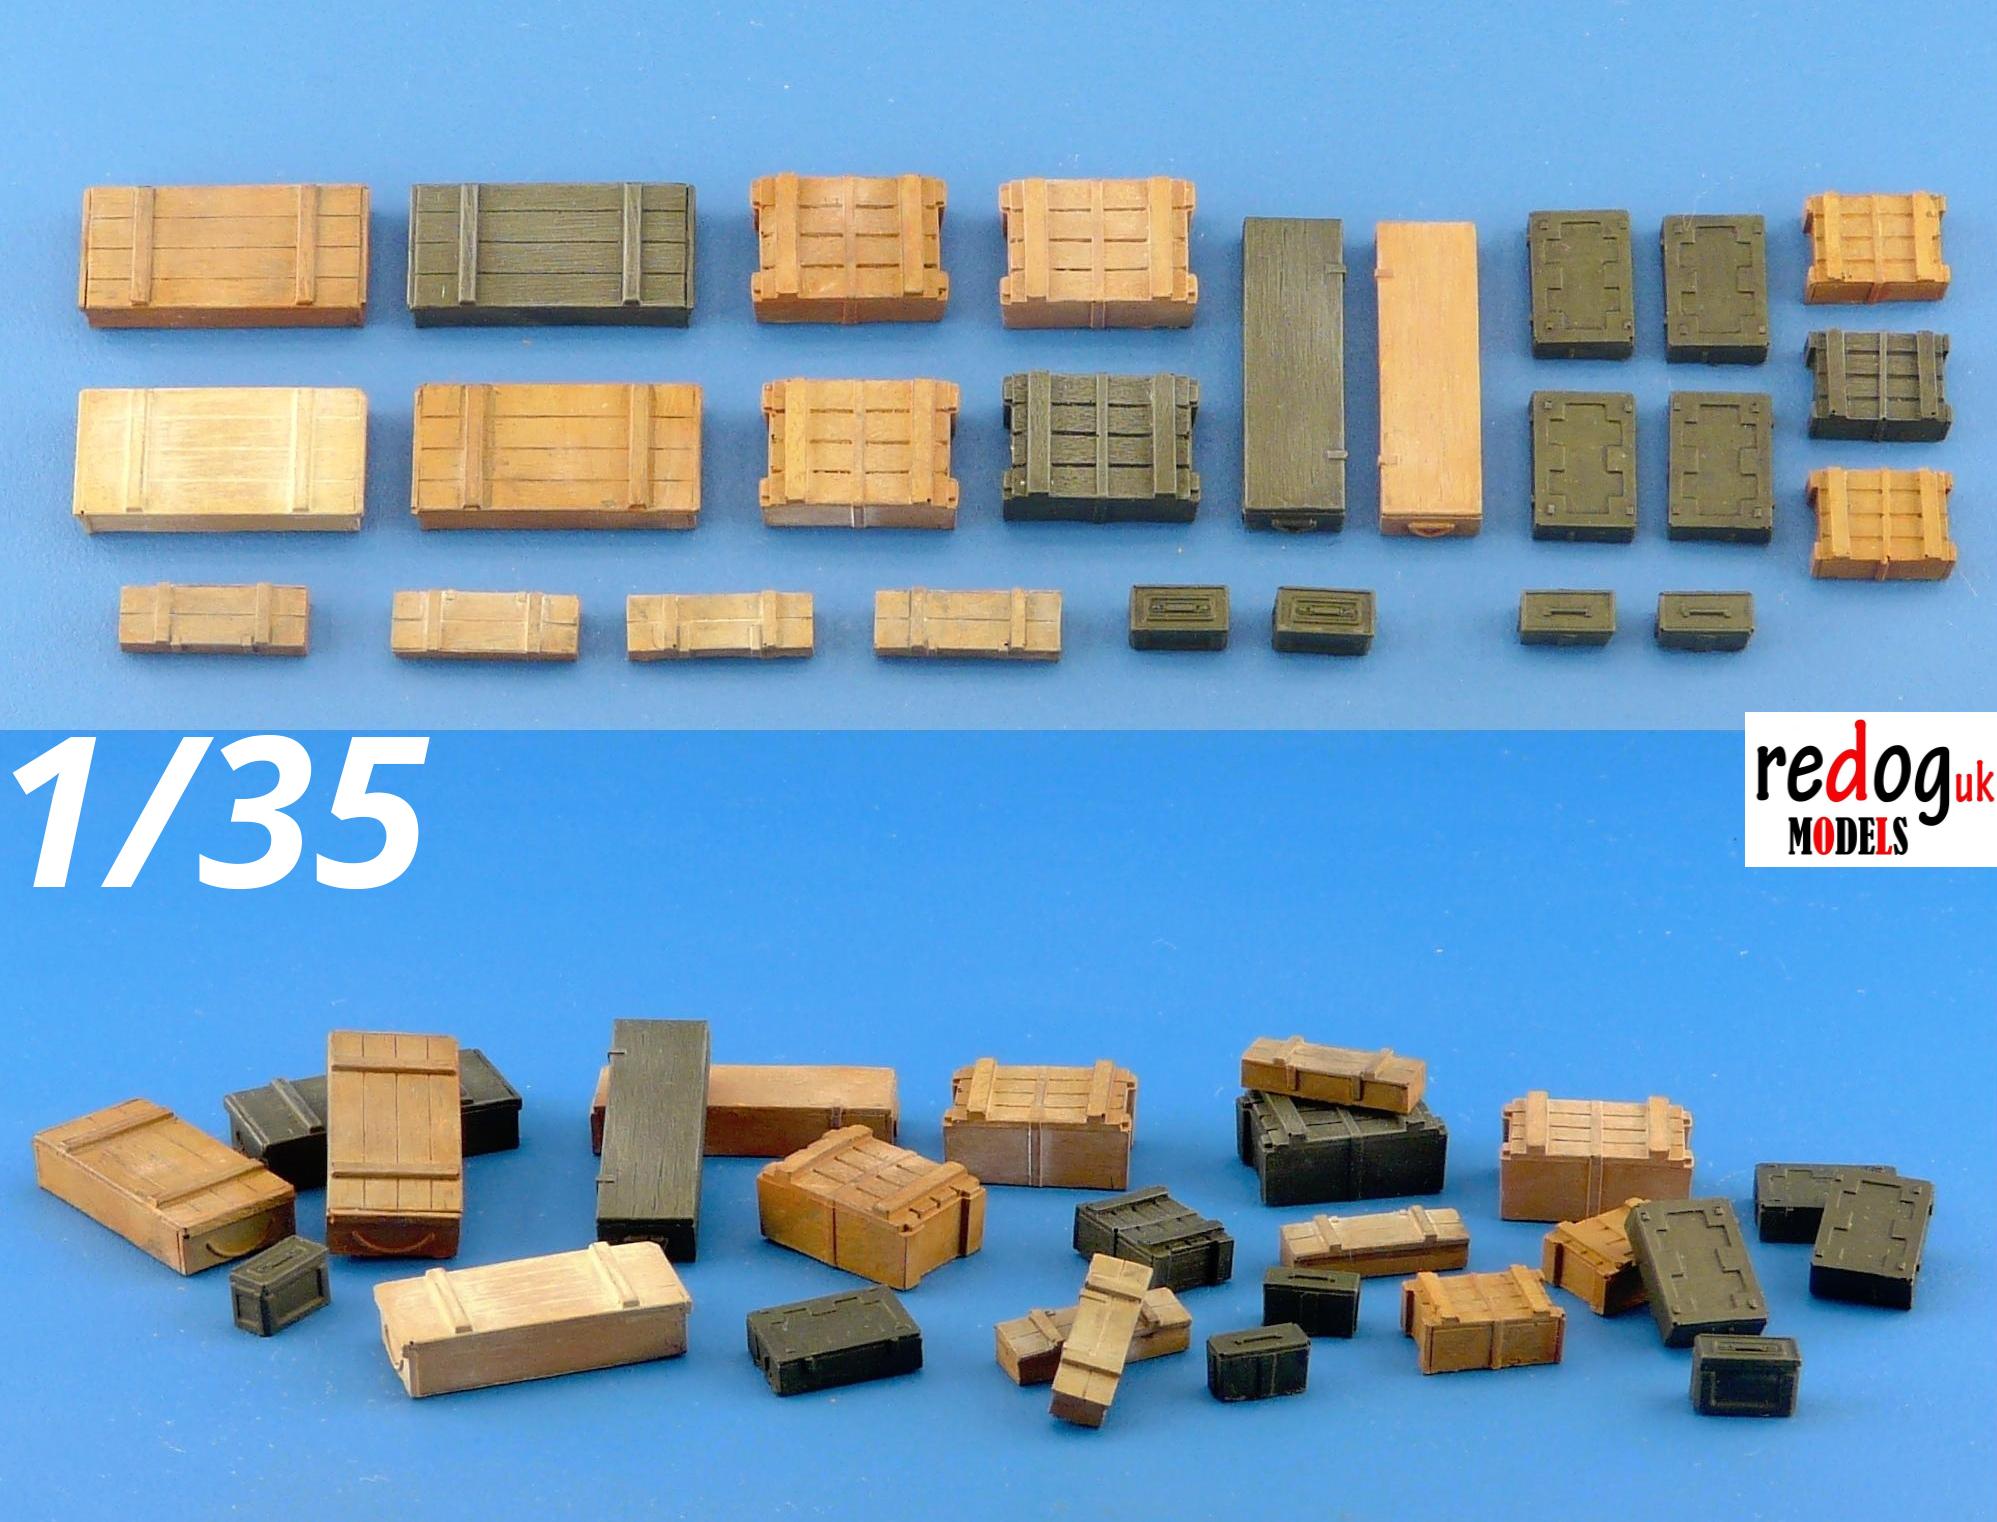 1/35 Boxes and Crates Mix - Military Scale Model Stowage Diorama Accessories Kit 2 - redoguk